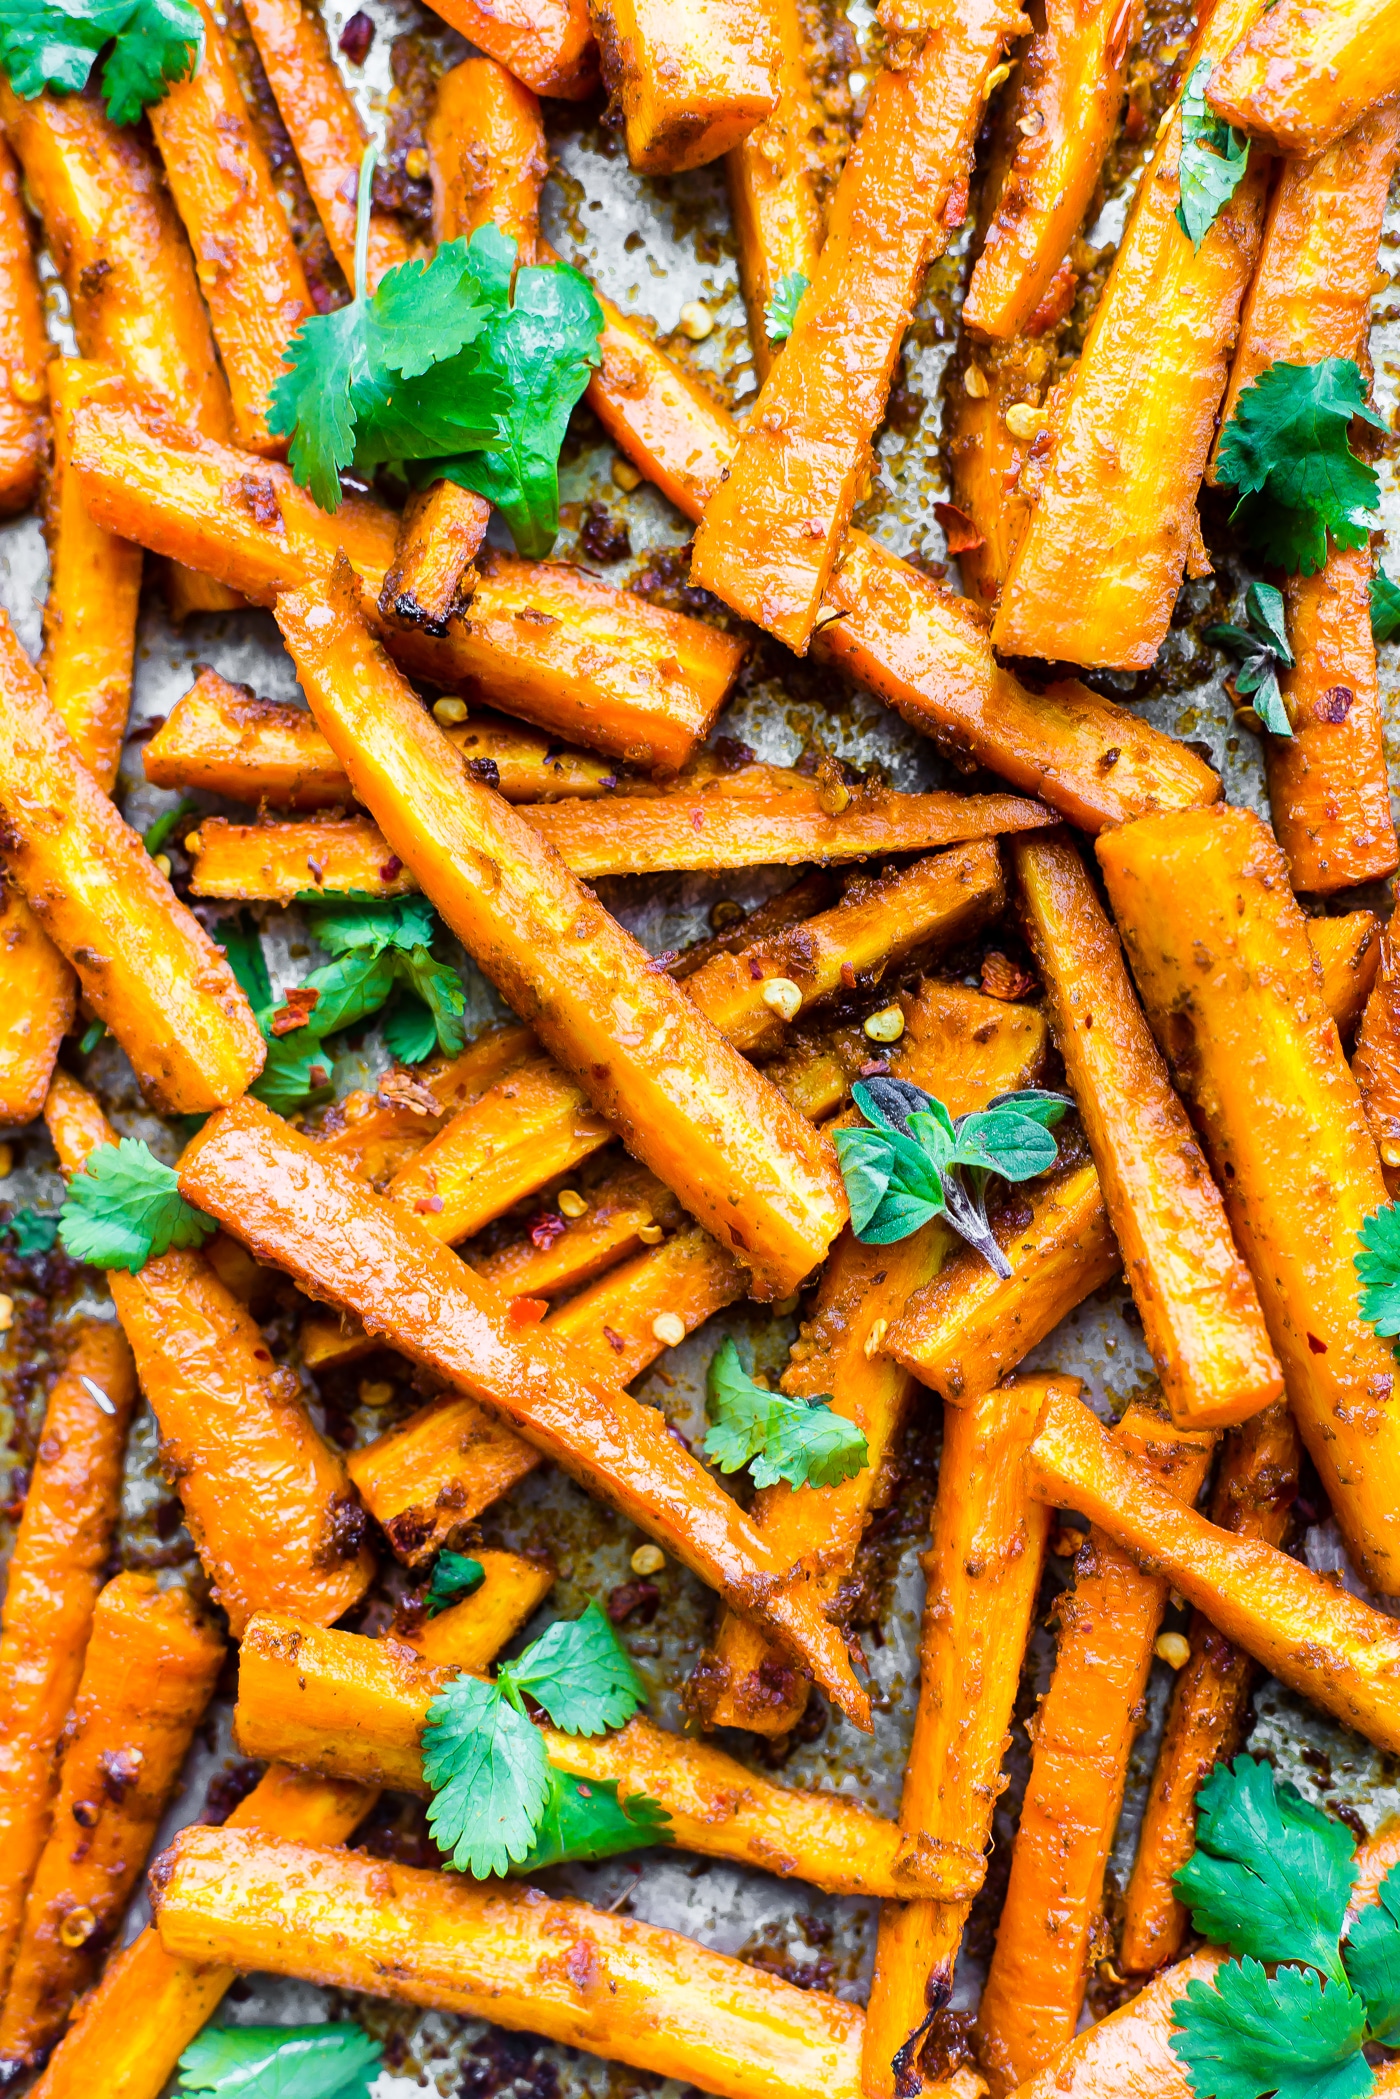 These Peri Peri oven baked carrot fries are gonna knock your socks off ya'll! The homemade Peri Peri Sauce is the key to making these carrot fries more flavorful. Just marinate slice carrots in the sauce, bake, and enjoy! A paleo, vegan, and whole 30 friendly snack with a kick of spice.